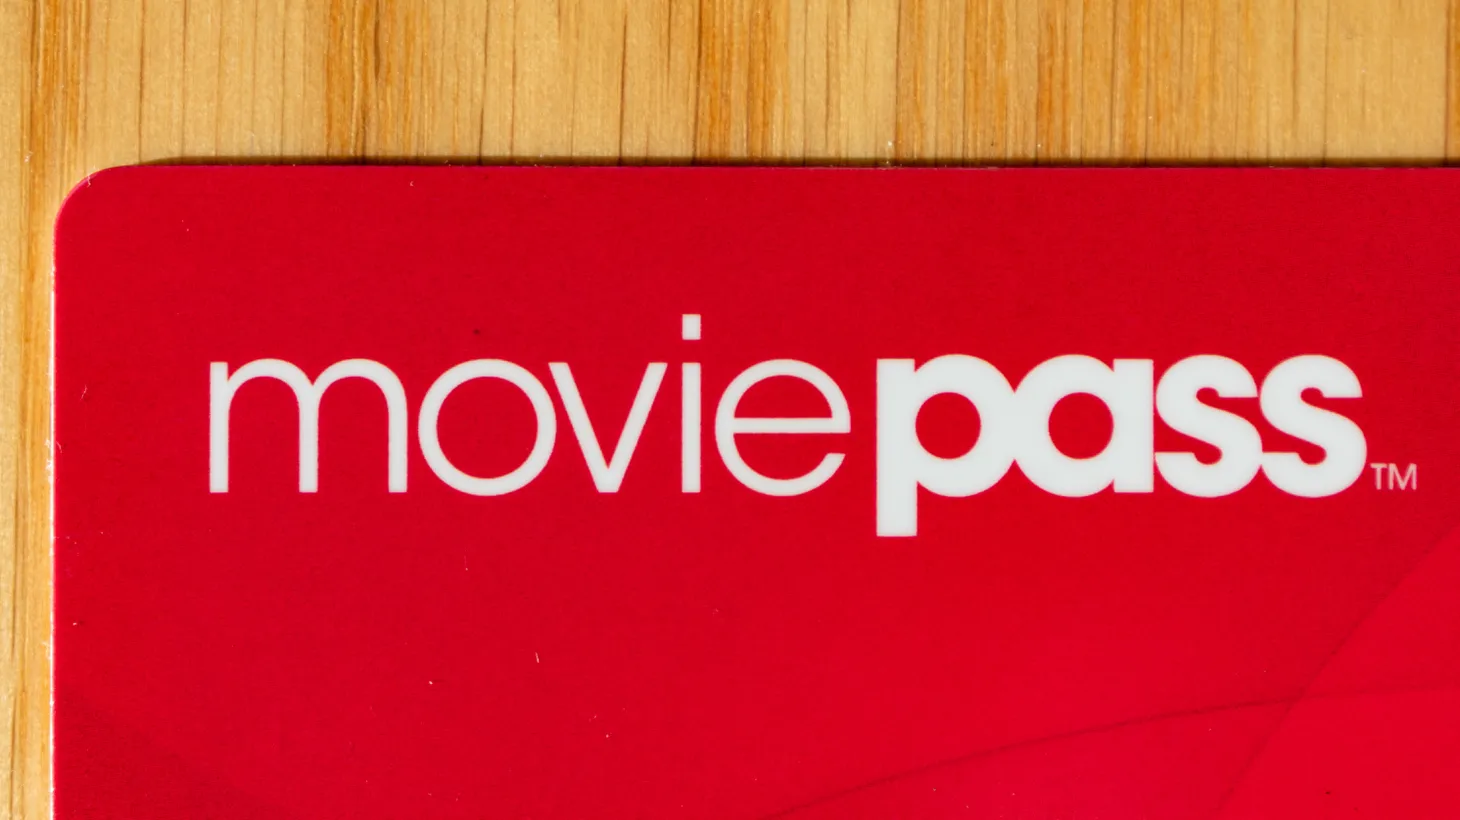 MoviePass went bankrupt in late 2018, but it’s planning to relaunch this summer.